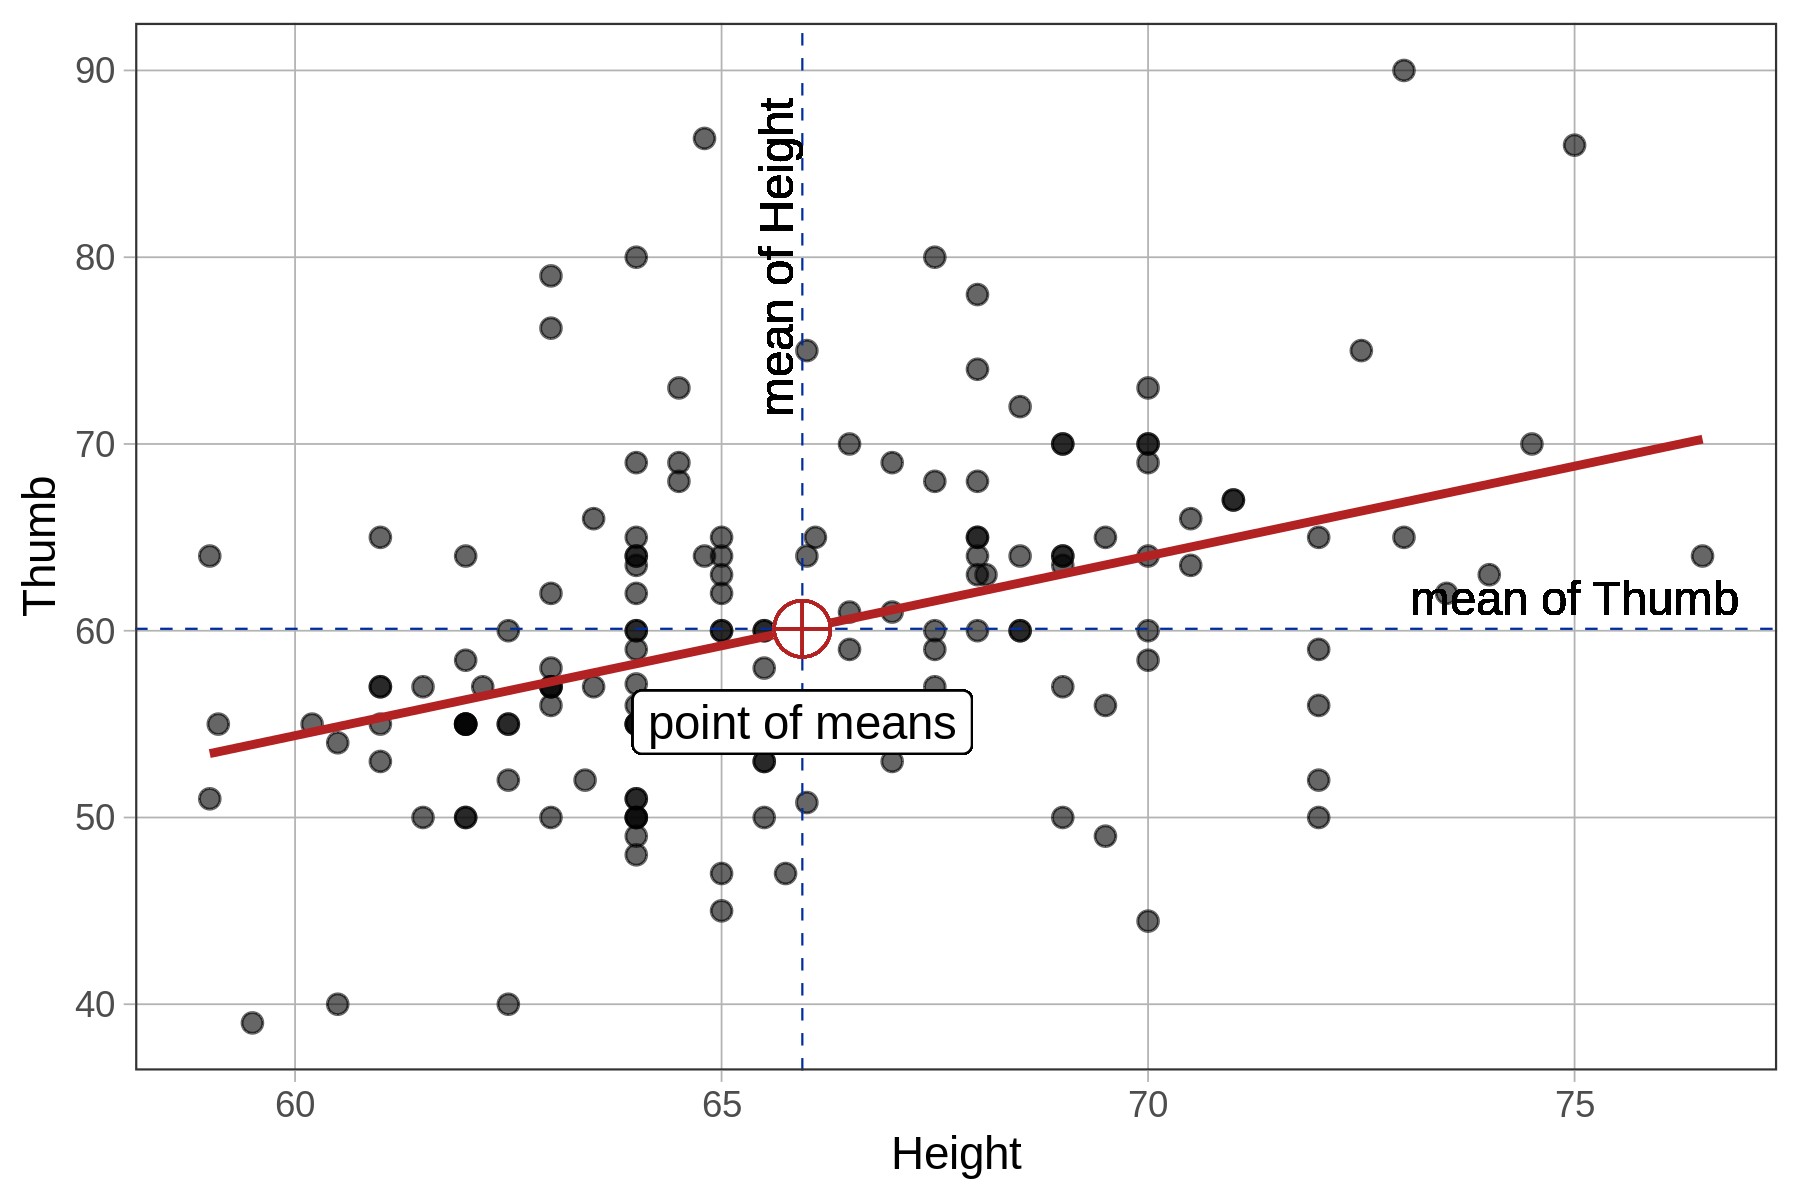 A scatterplot of the distribution of Thumb by Height overlaid with the regression line in red. A horizontal line representing the mean of Thumb intersects with a vertical line representing the mean of Height at the point of means which also lies on the regression line.